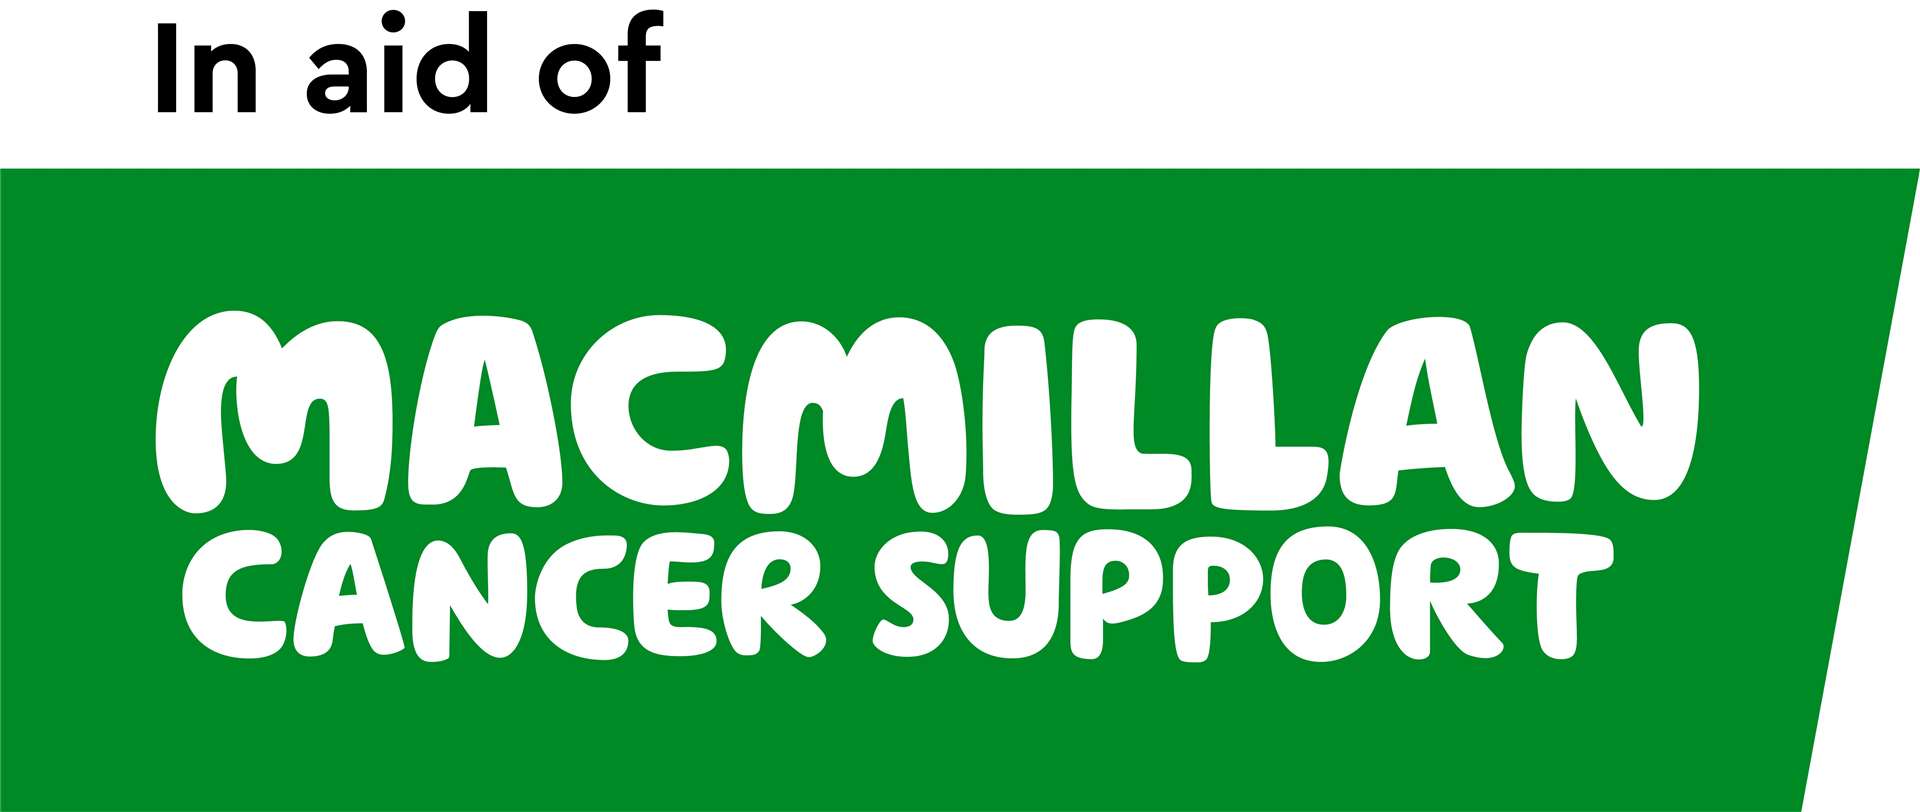 The game will raise money for Macmillan Cancer Support.